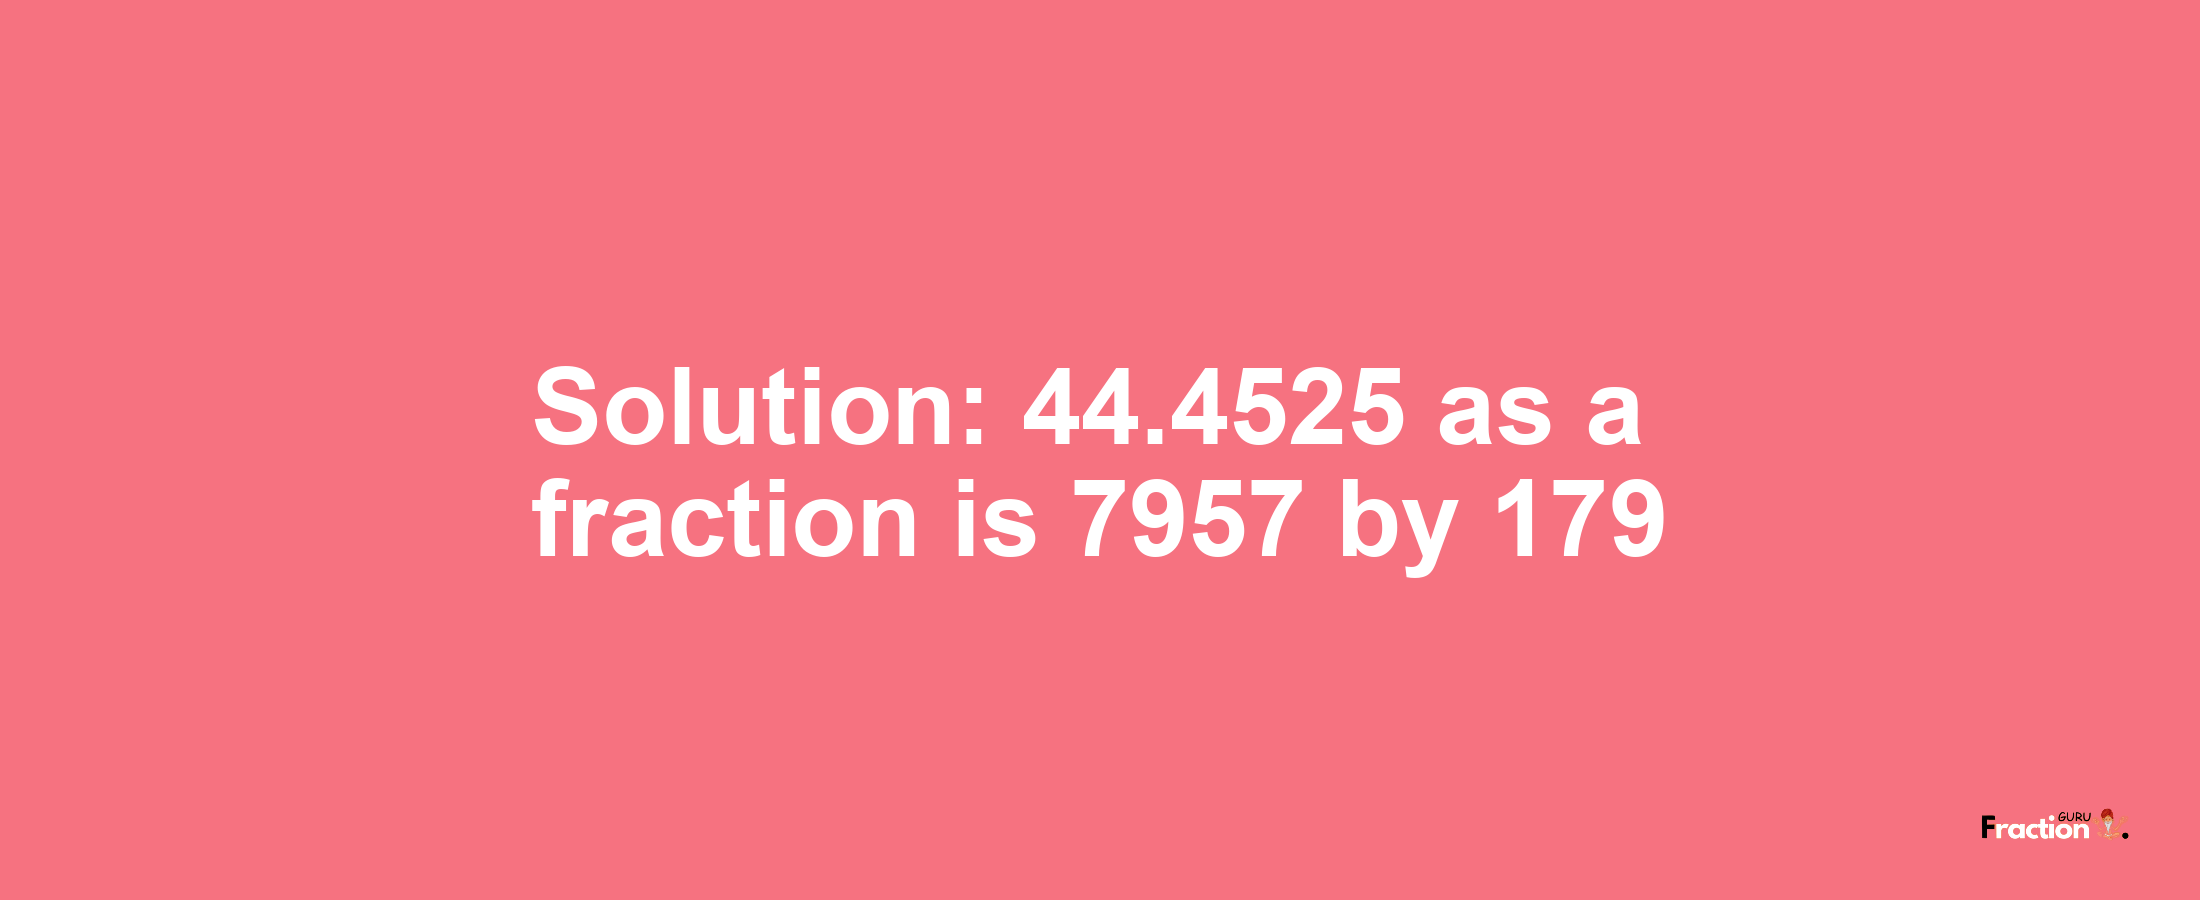 Solution:44.4525 as a fraction is 7957/179